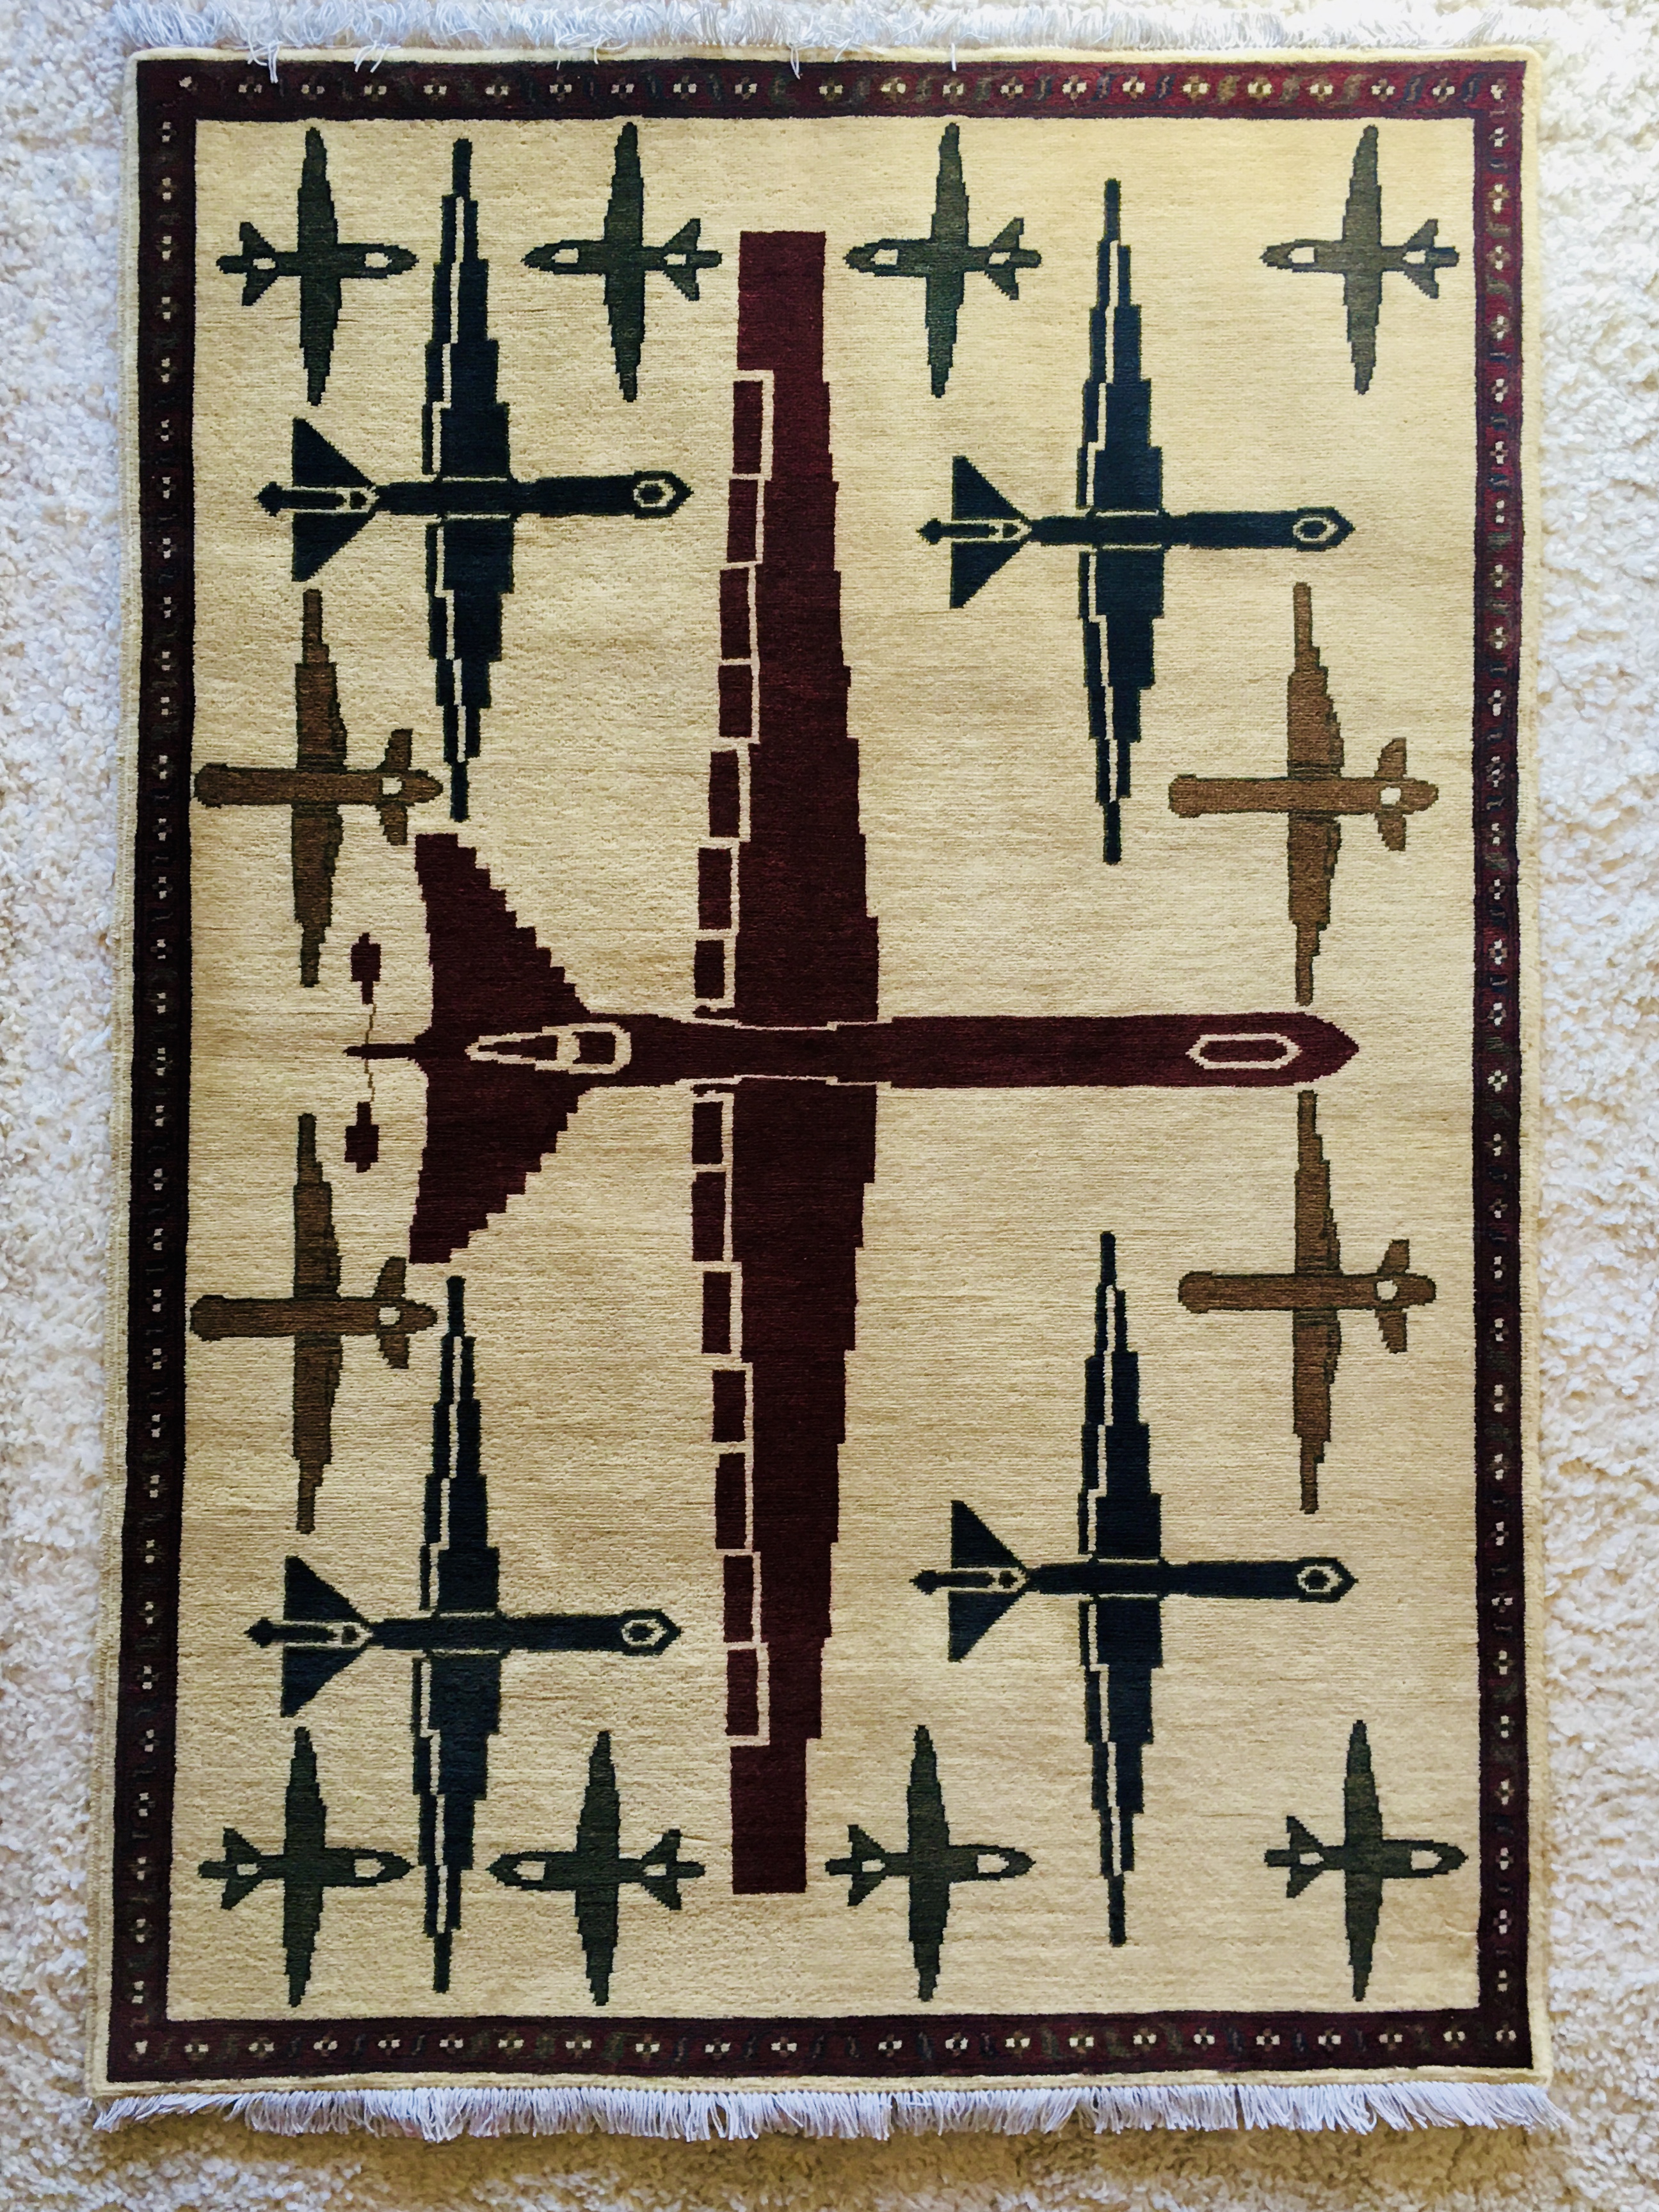 A rug with a soft white background displaying a geometric pattern of war planes in different dark colors